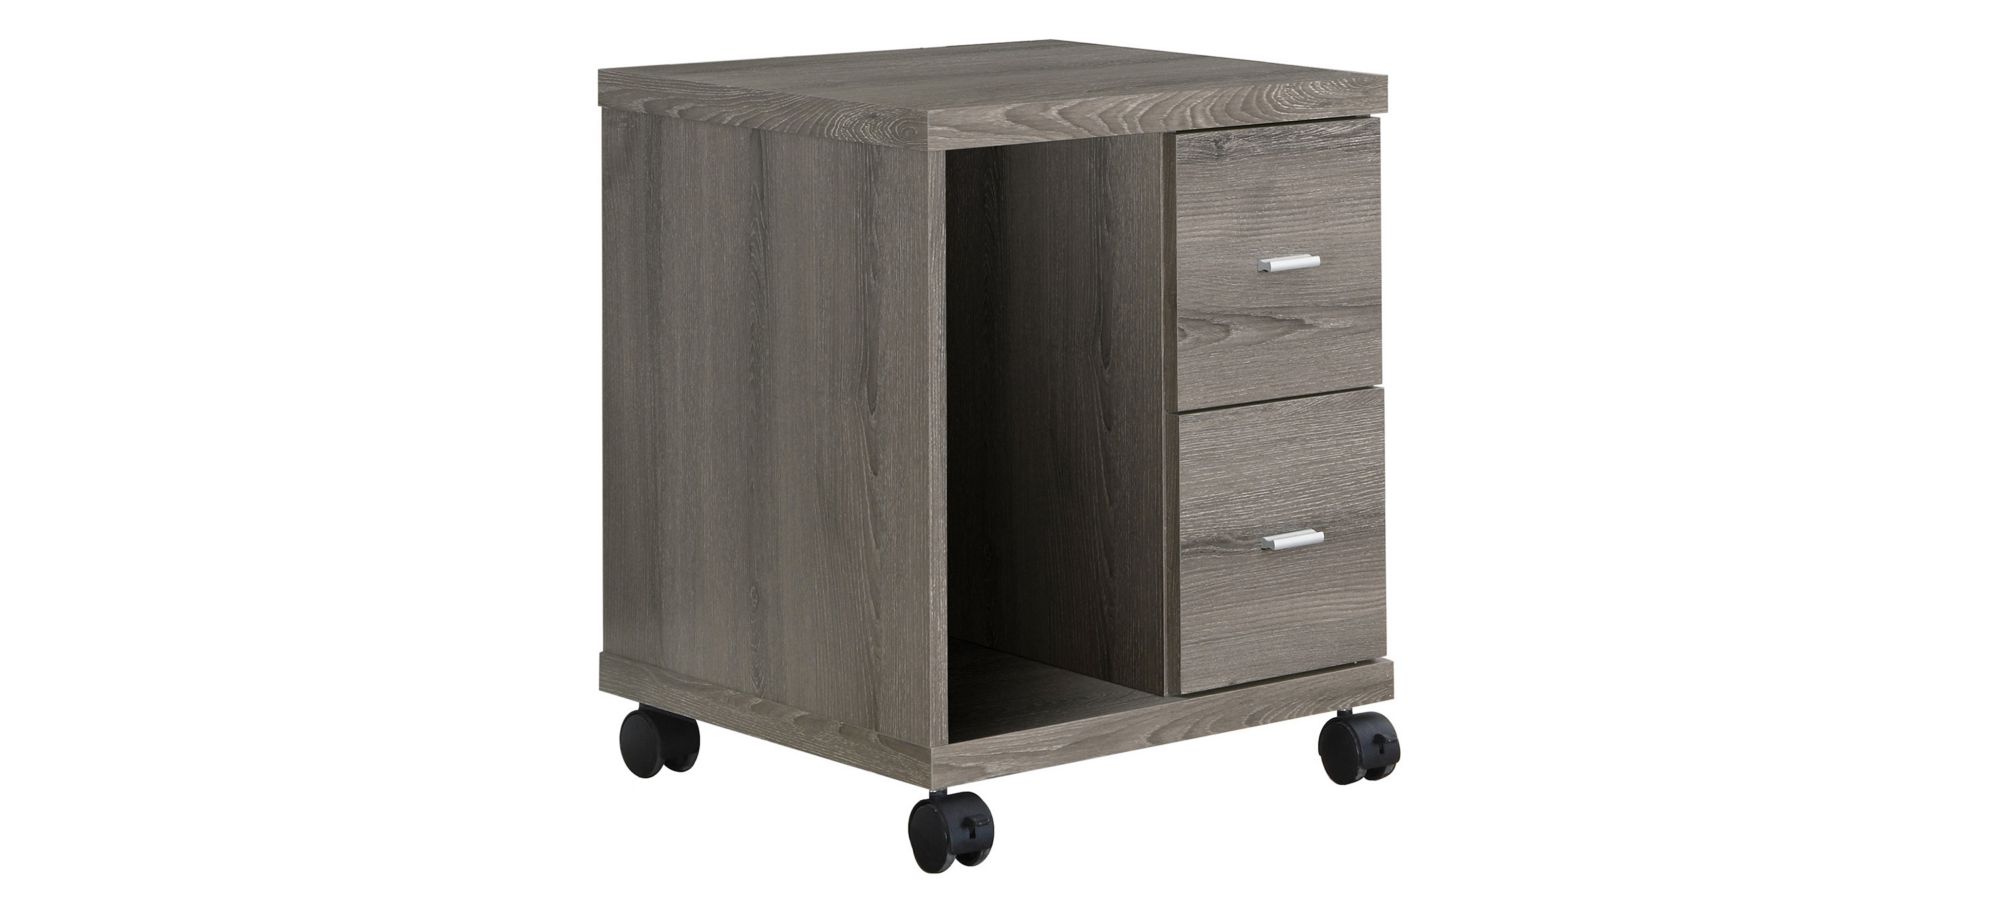 Monarch 23" Office Cabinet in Dark Taupe by Monarch Specialties